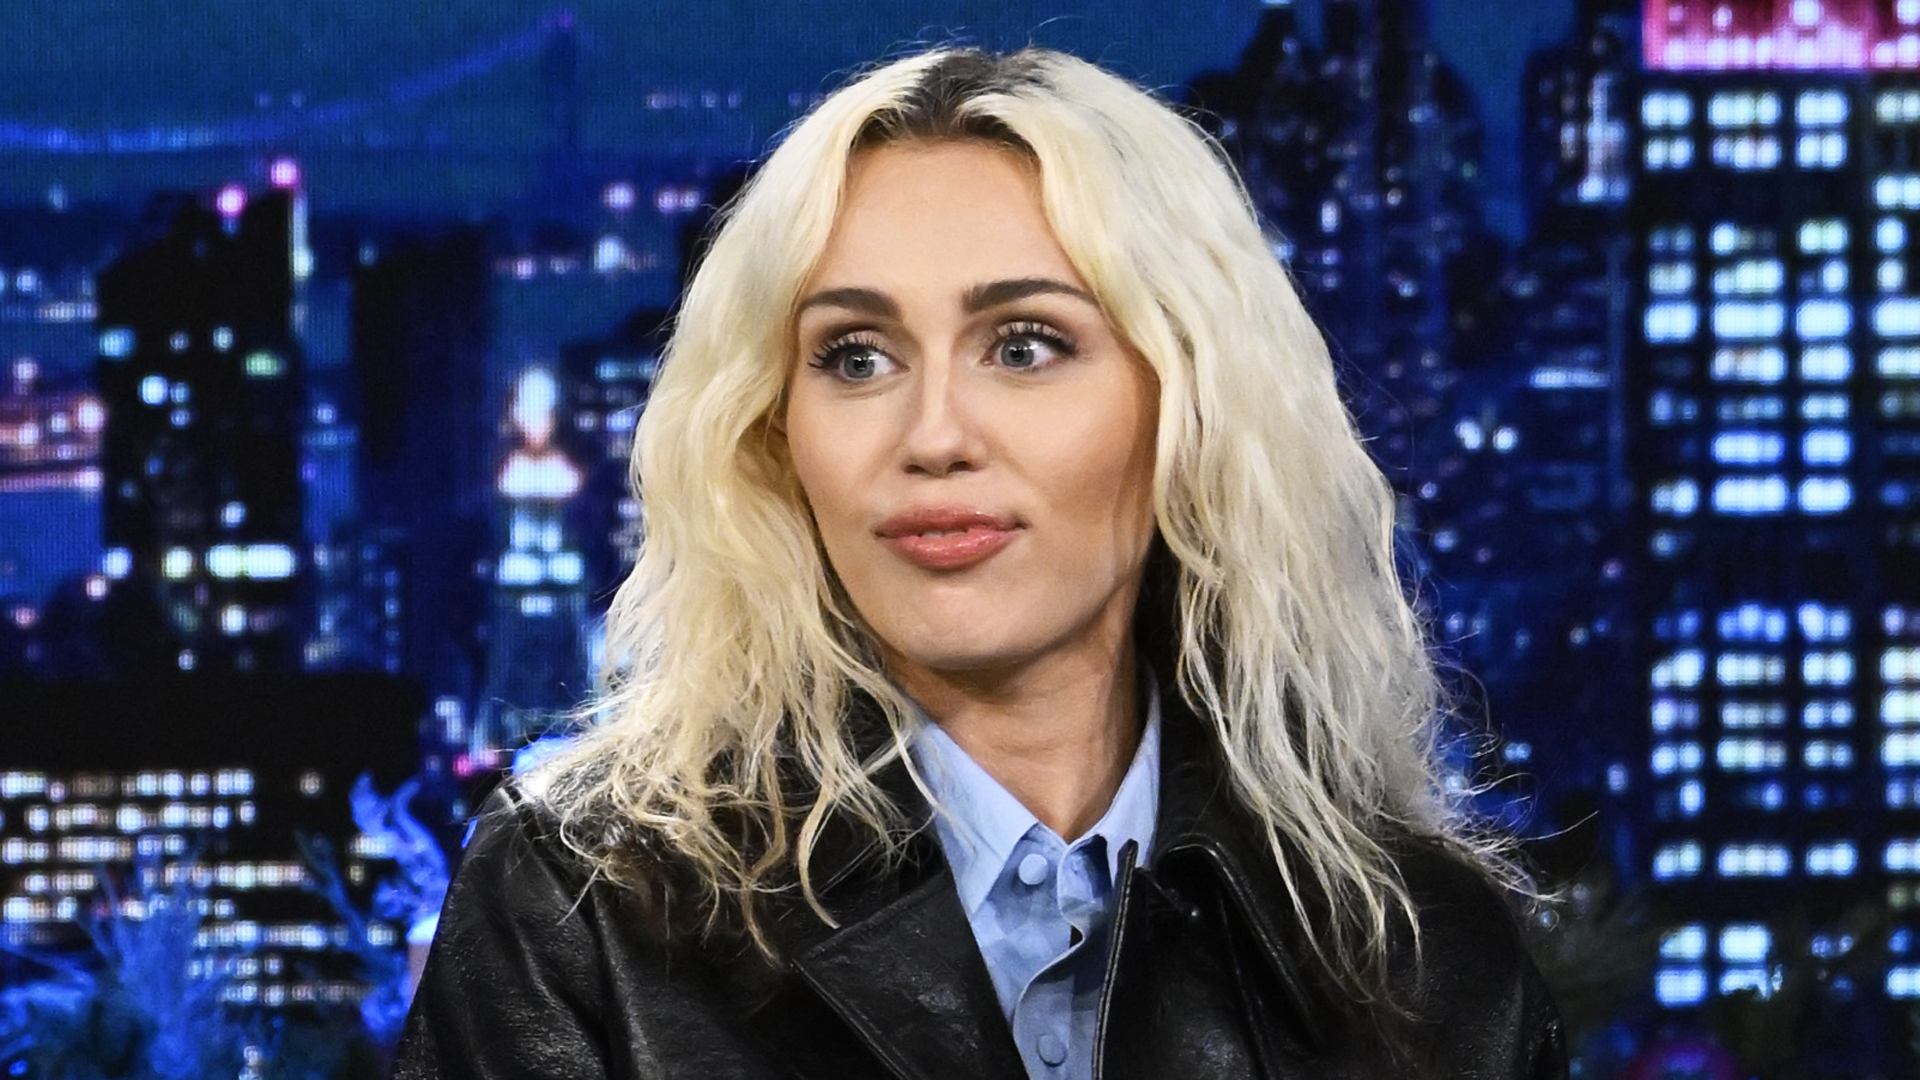 Miley Cyrus Debuts Even Bigger '70s Hair for a Major Announcement